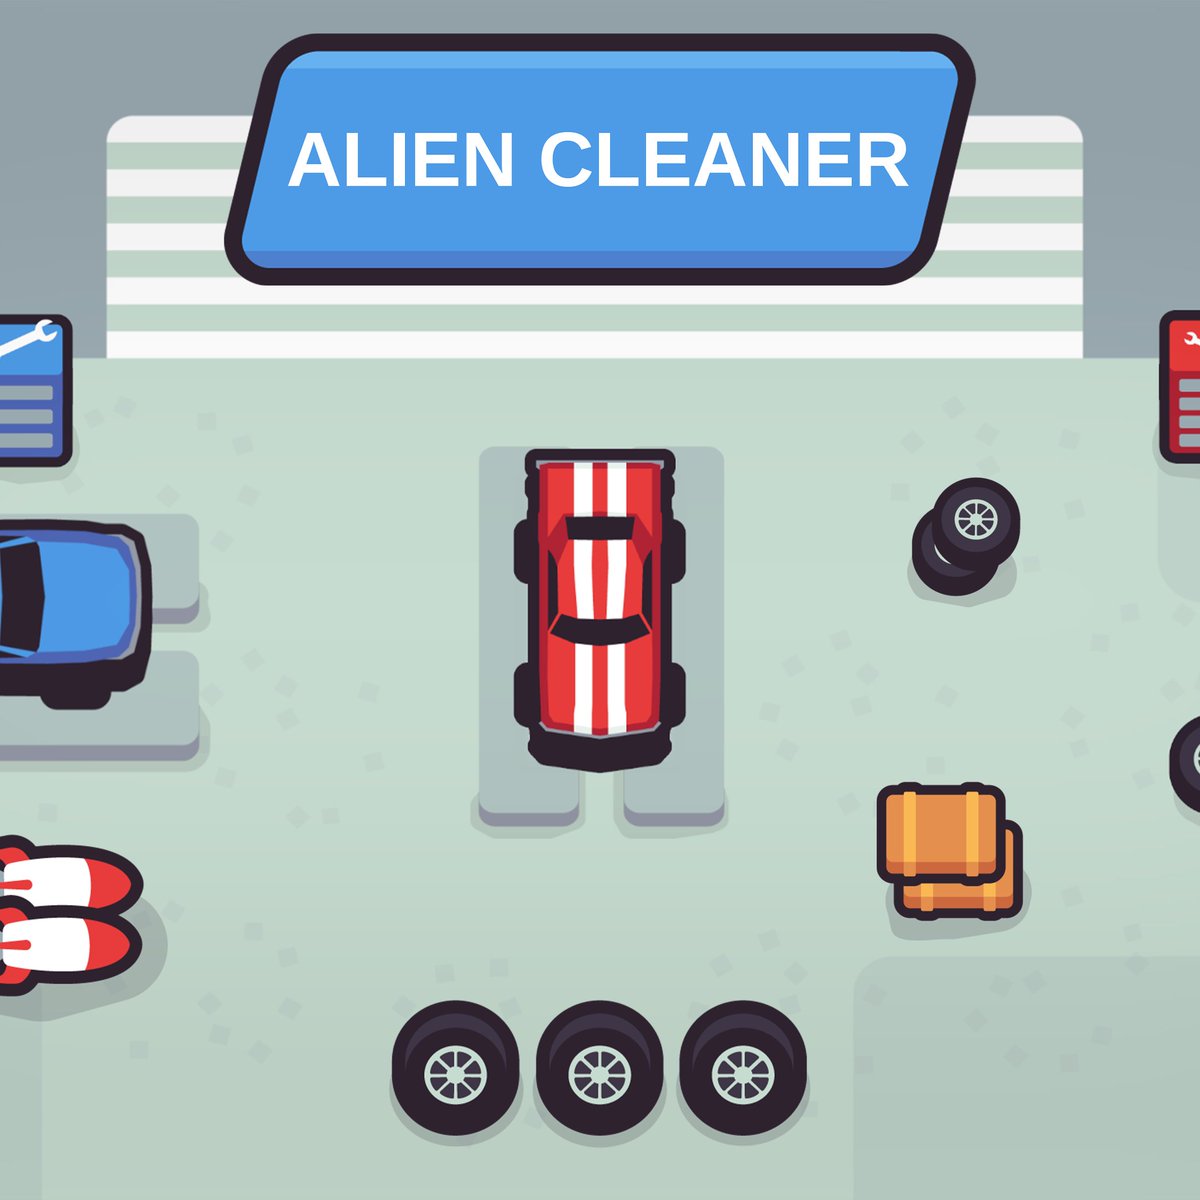 Alien Cleaner is finally out now! 🇪🇺 EU: 👉PS4 bit.ly/4aGx7Bg 👉PS5 bit.ly/3JpzUT6 🇺🇸 US: 👉PS4 bit.ly/4b0Nb0u 👉PS5 bit.ly/49EJ9K4